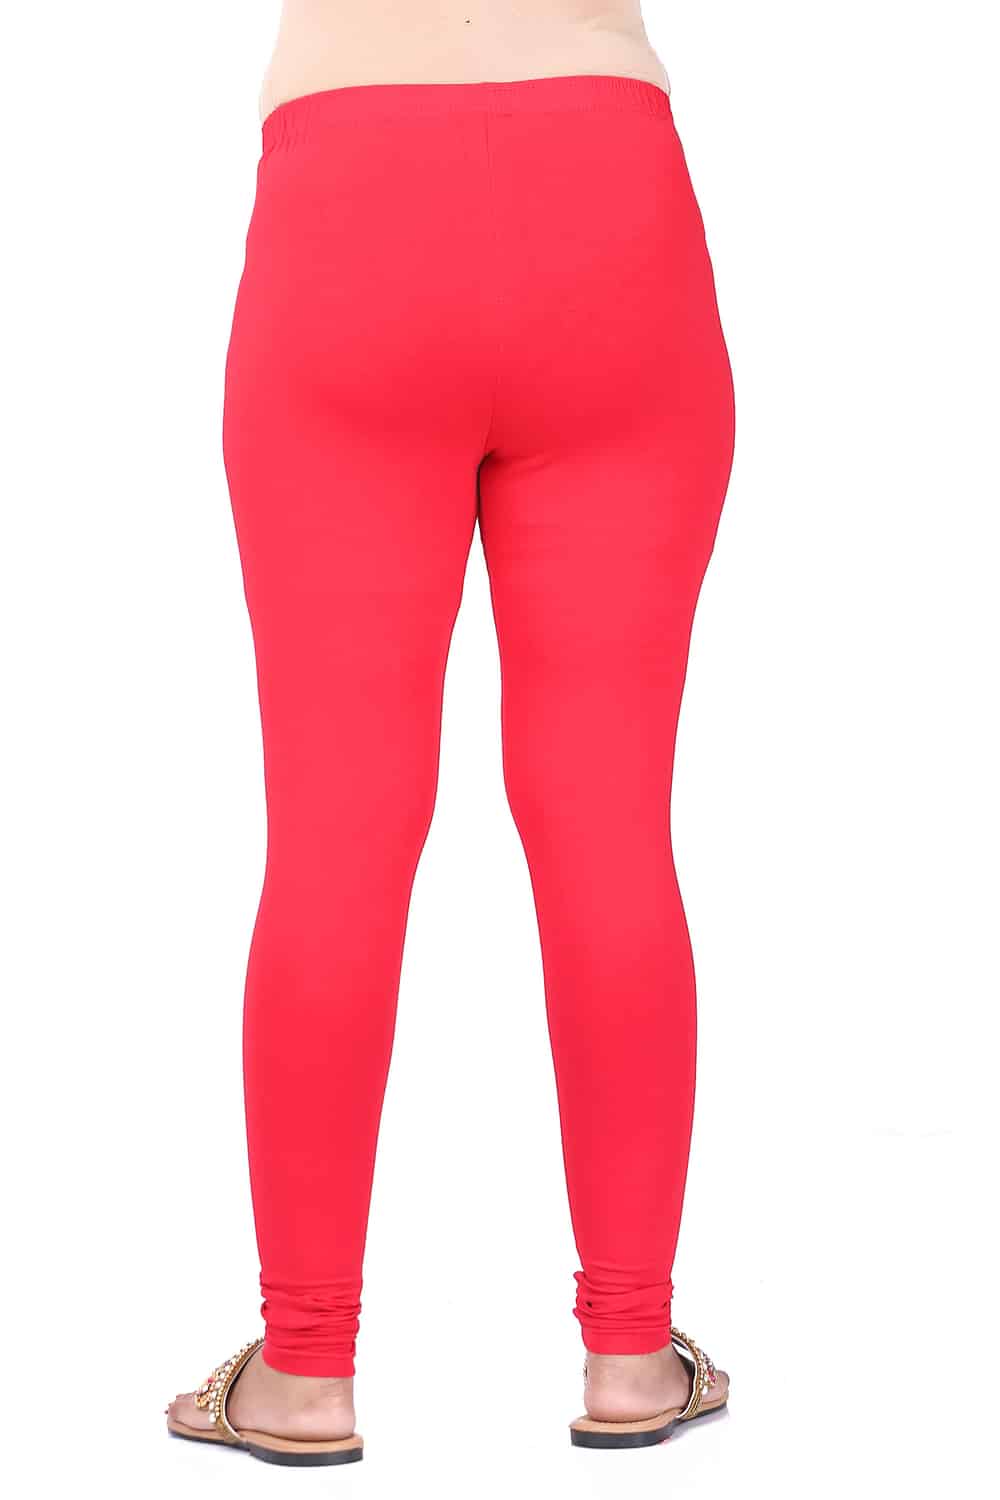 Buy LYRA Rose Pink Superior staple cotton Ankle Length Leggings.Look like  new even after repeated washing,Suitably designed to mould any body shape  perfectly. Online at Best Prices in India - JioMart.